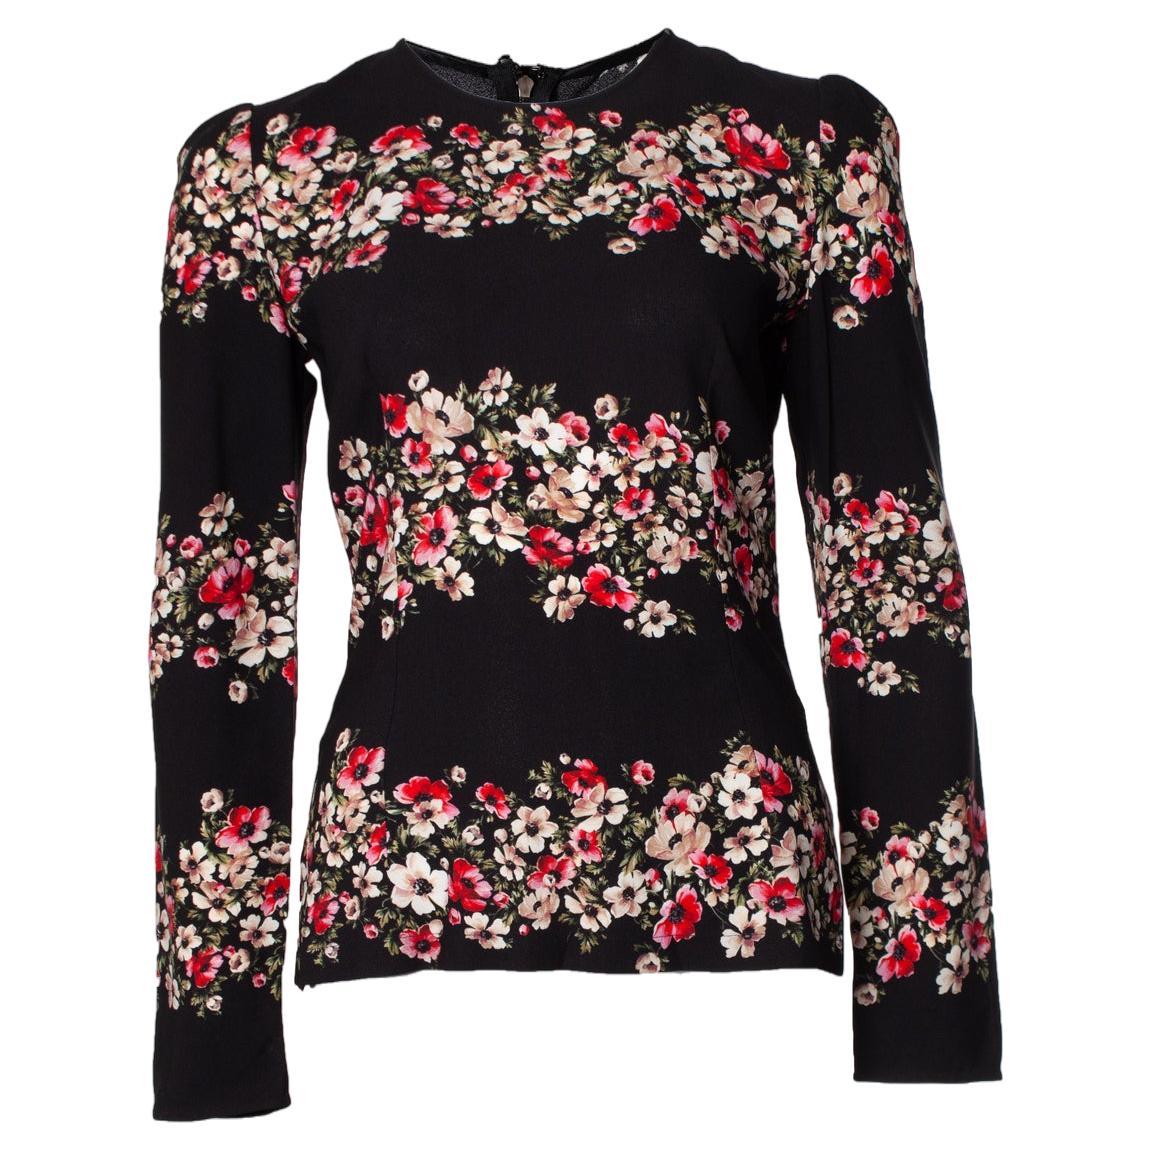 Dolce & Gabbana, Black top with floral print For Sale